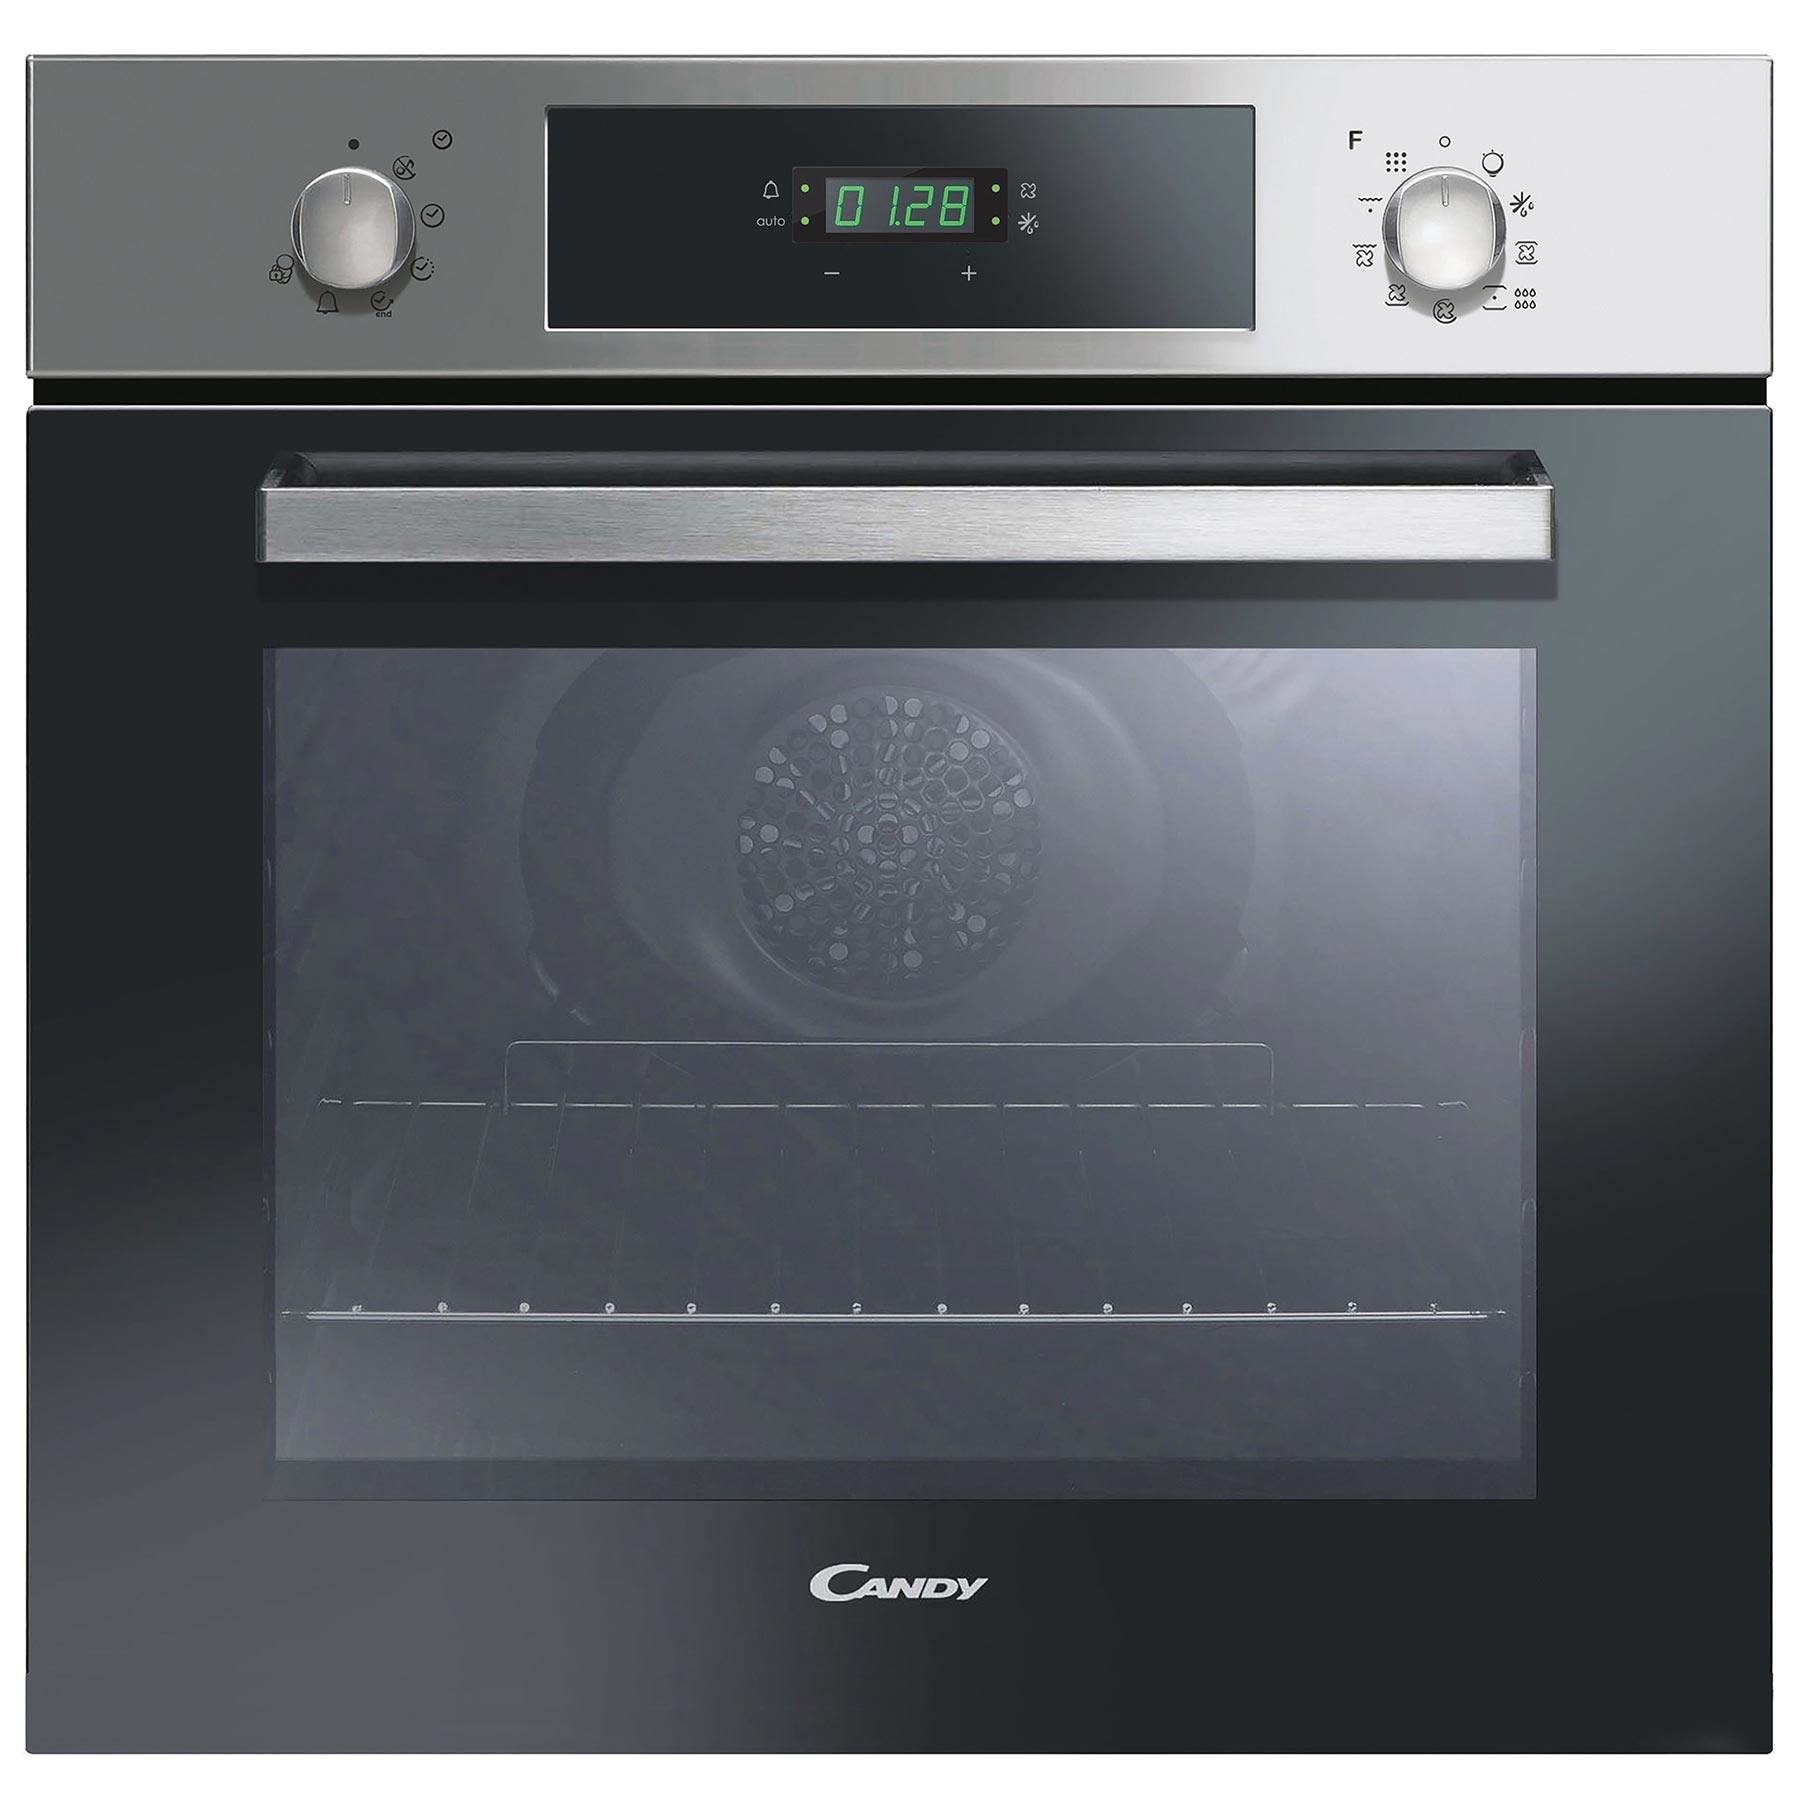 Candy CELFP886X Built In Pyrolytic Electric Single Oven in St Steel 70